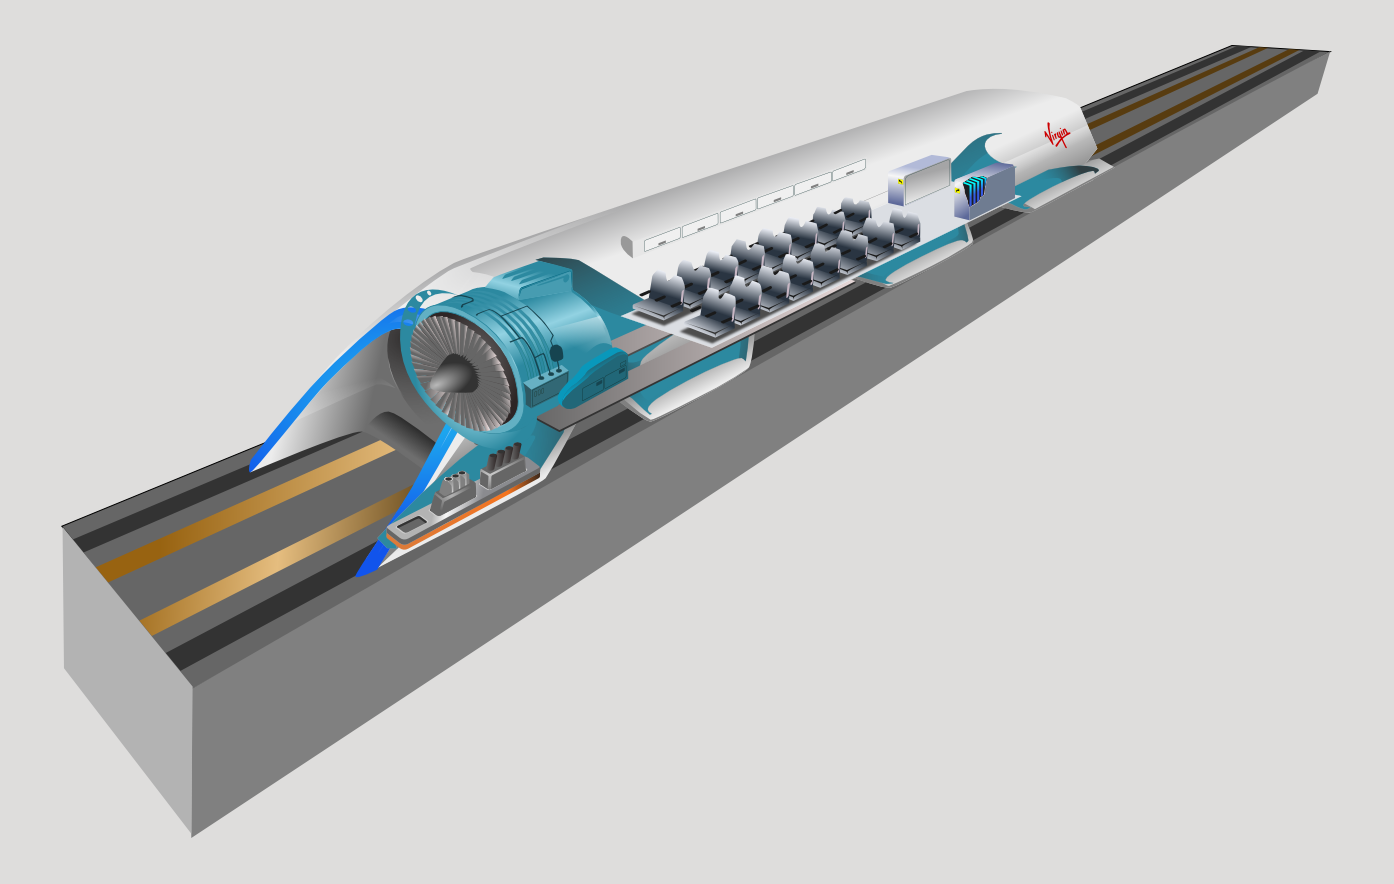 Looping back? Missouri partners with Hyperloop to study 23-minute KC-St Louis route